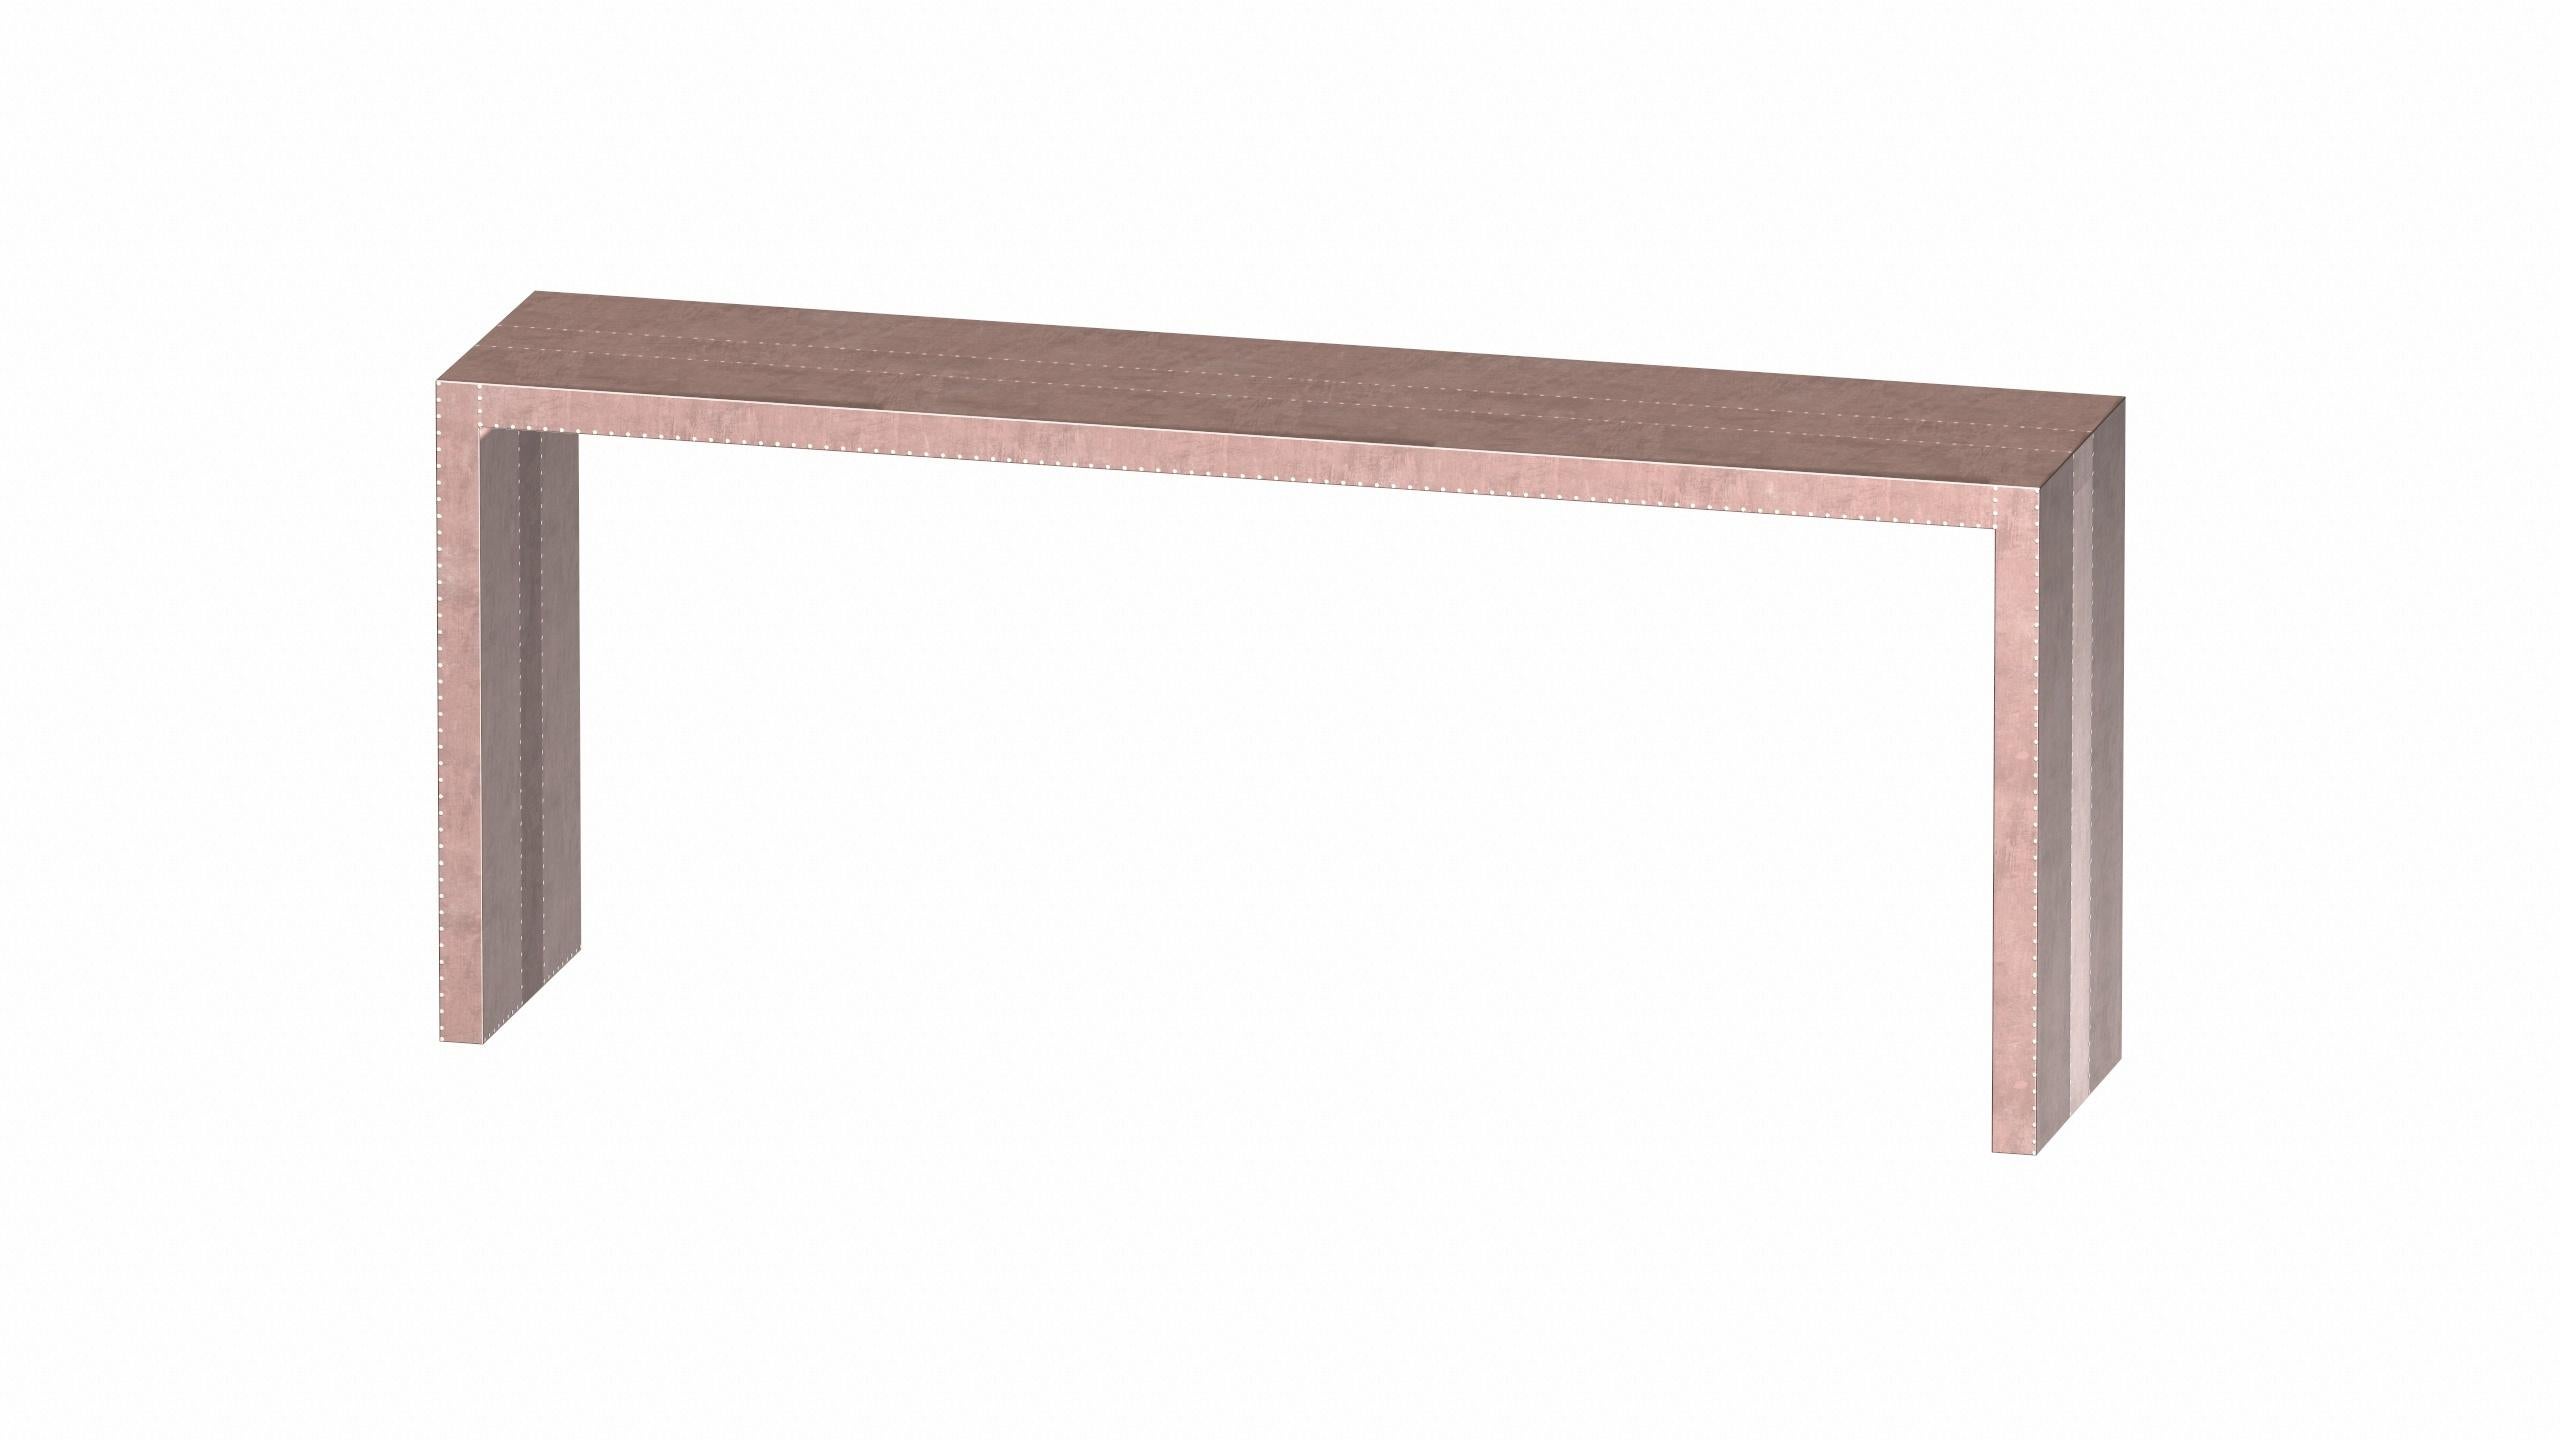 Art Nouveau Tray Tables Rectangular Console in Smooth Copper by Alison Spear For Sale 3